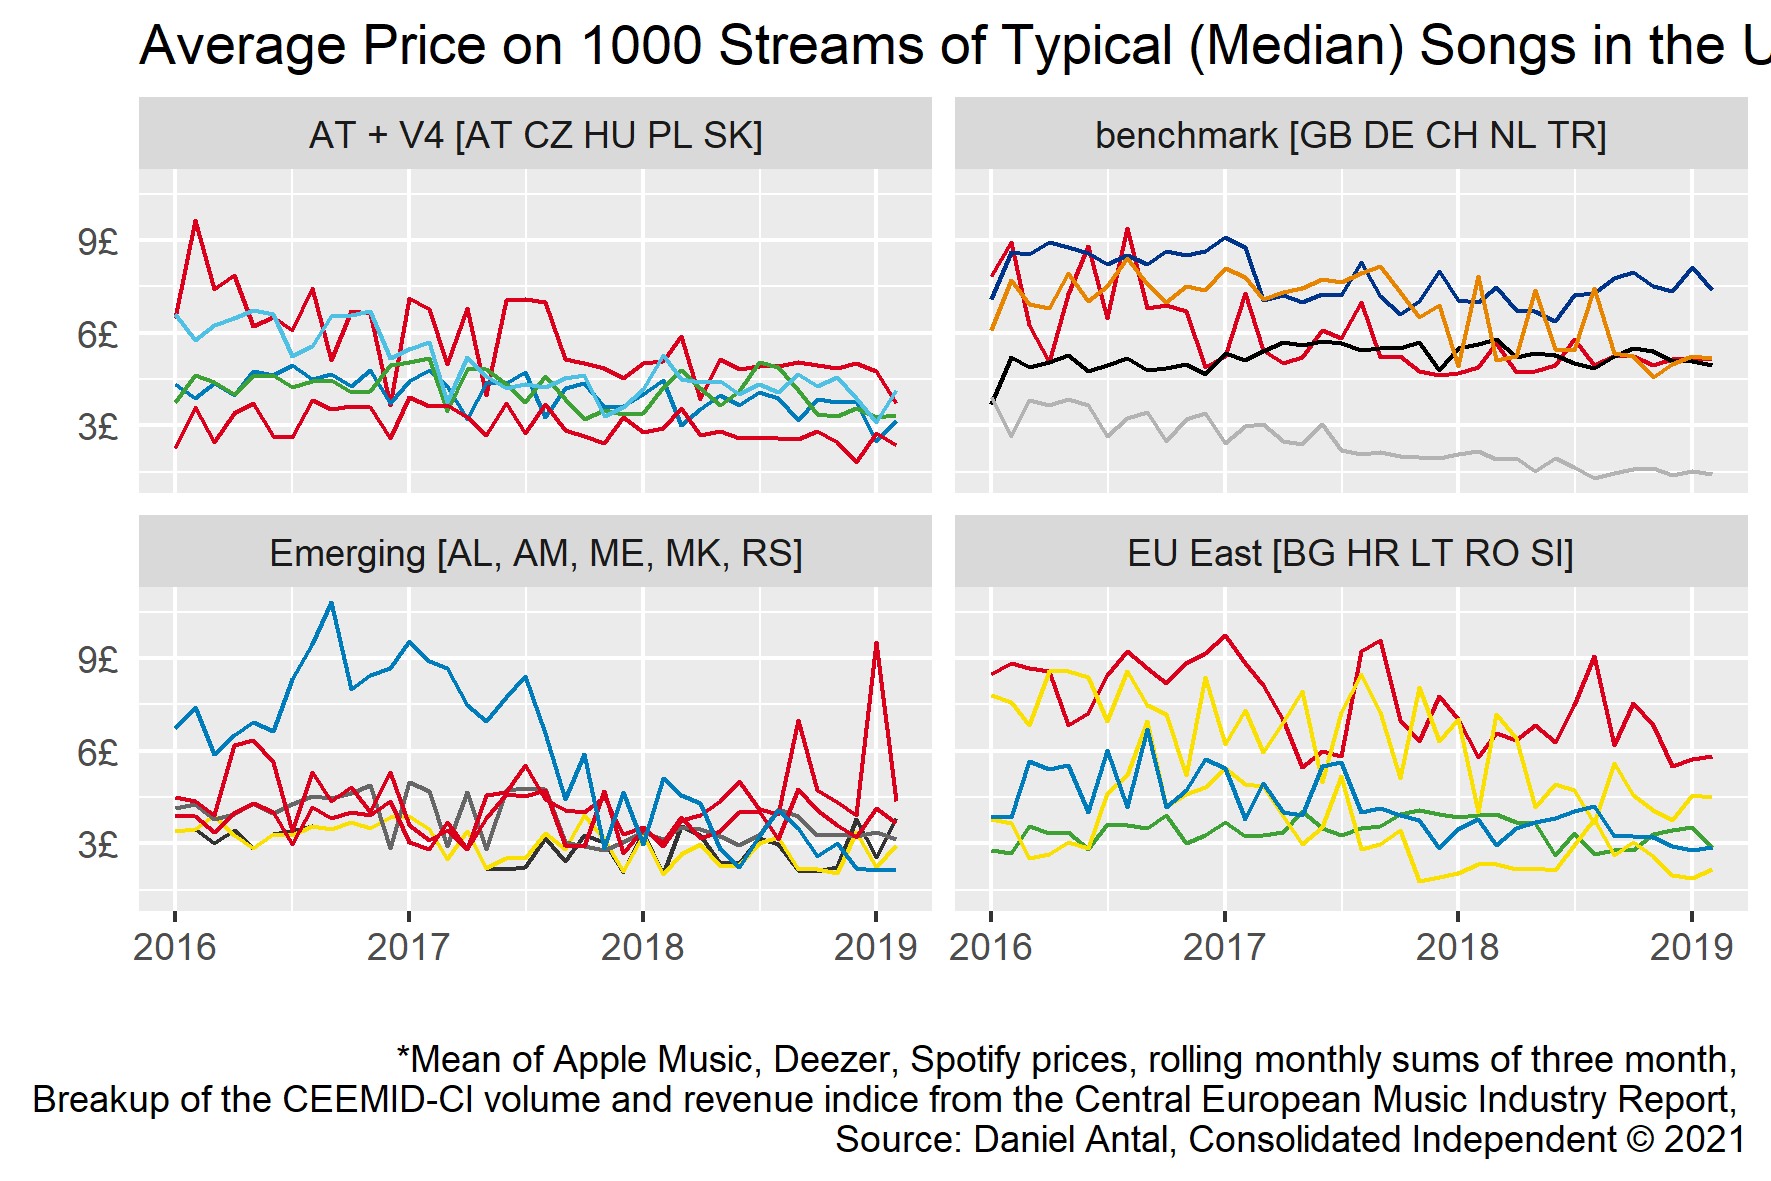 Total Monthly Streams of a Typical Song in the United Kingdom and 19 European Markets